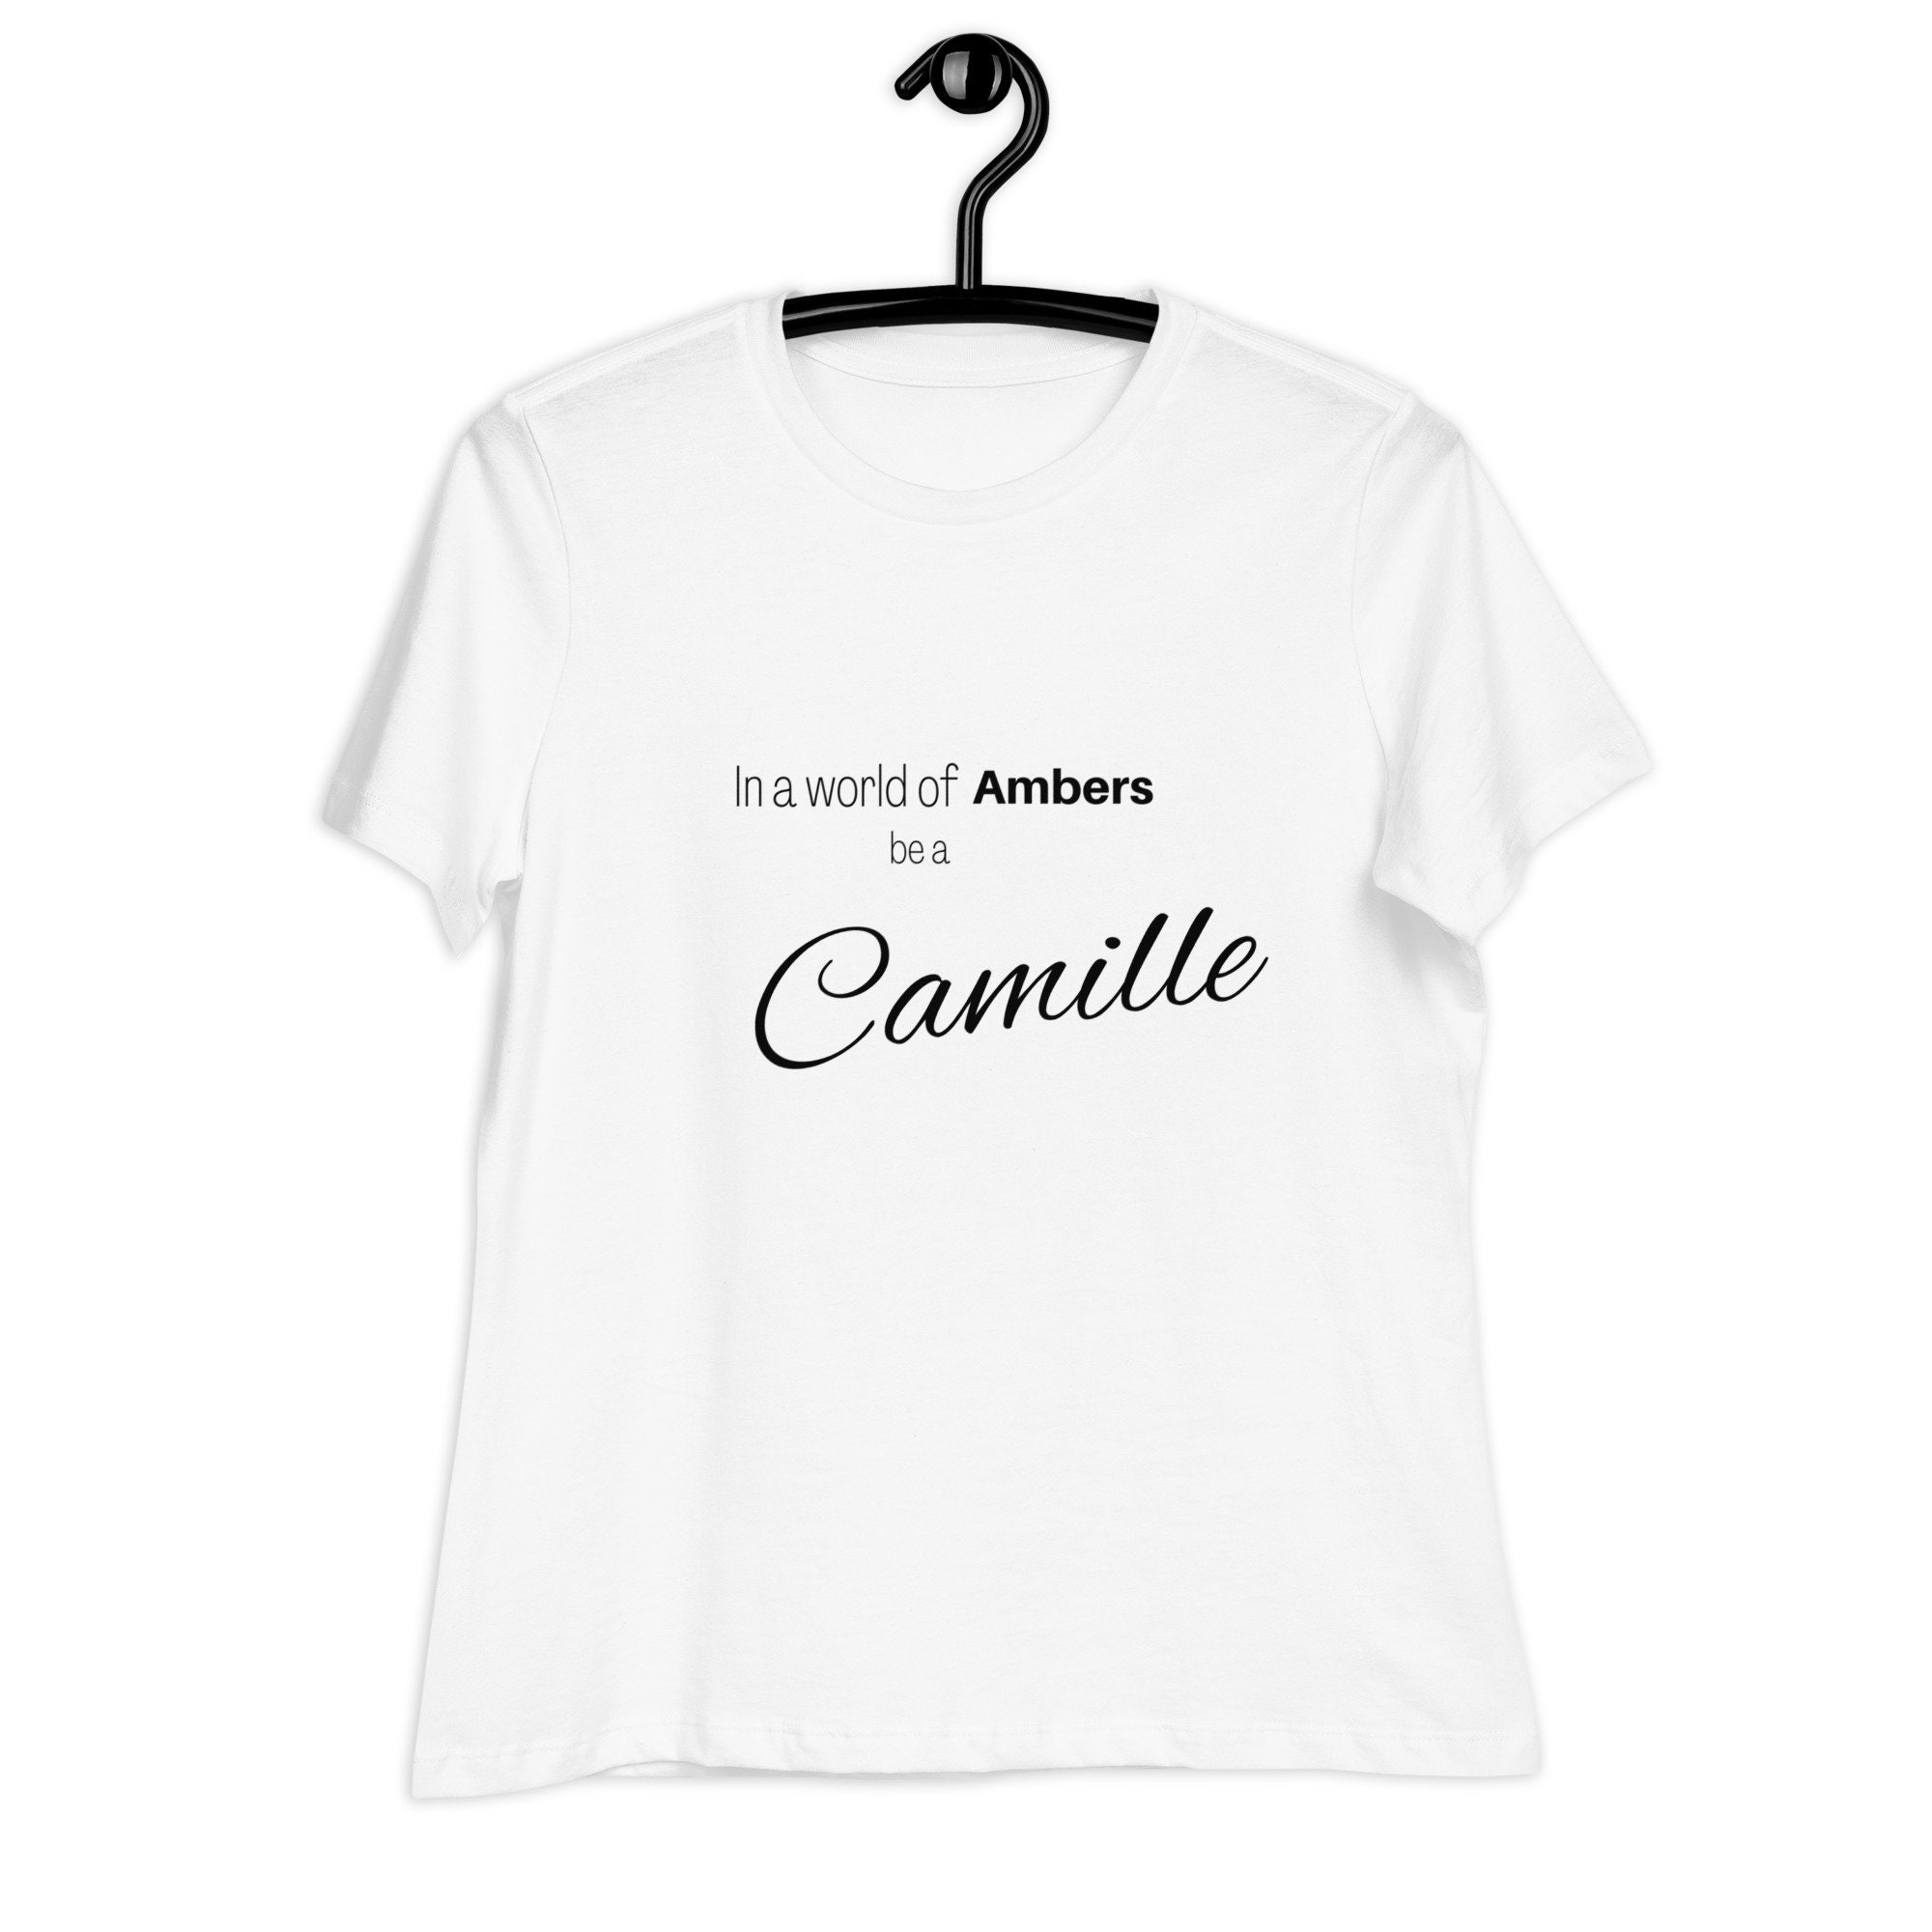 World Full of Ambers Camille is My Lawyer Shirt I Love | Etsy